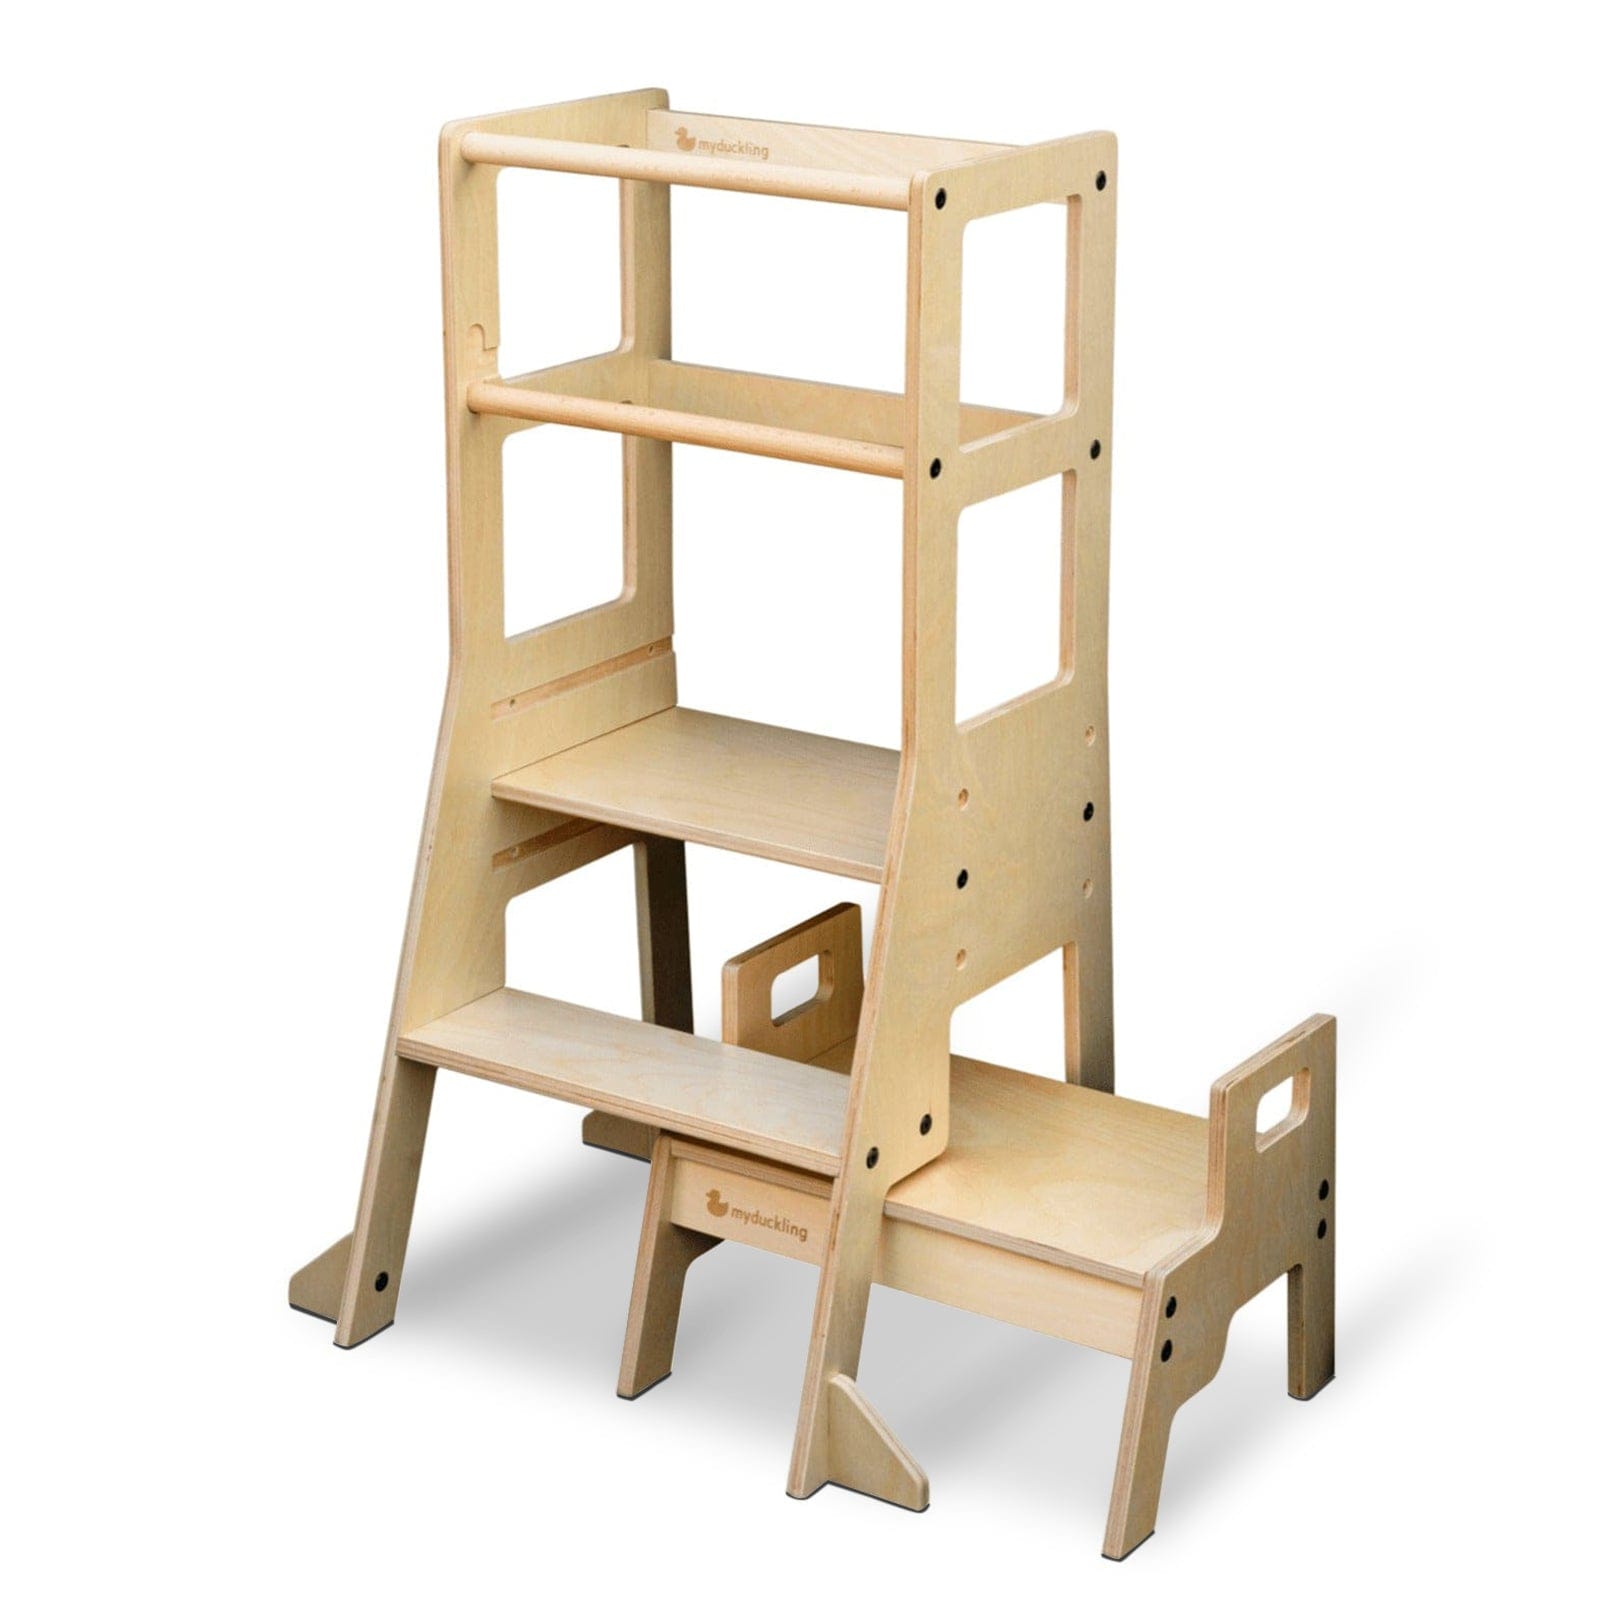 JALA Deluxe Adjustable Learning Tower